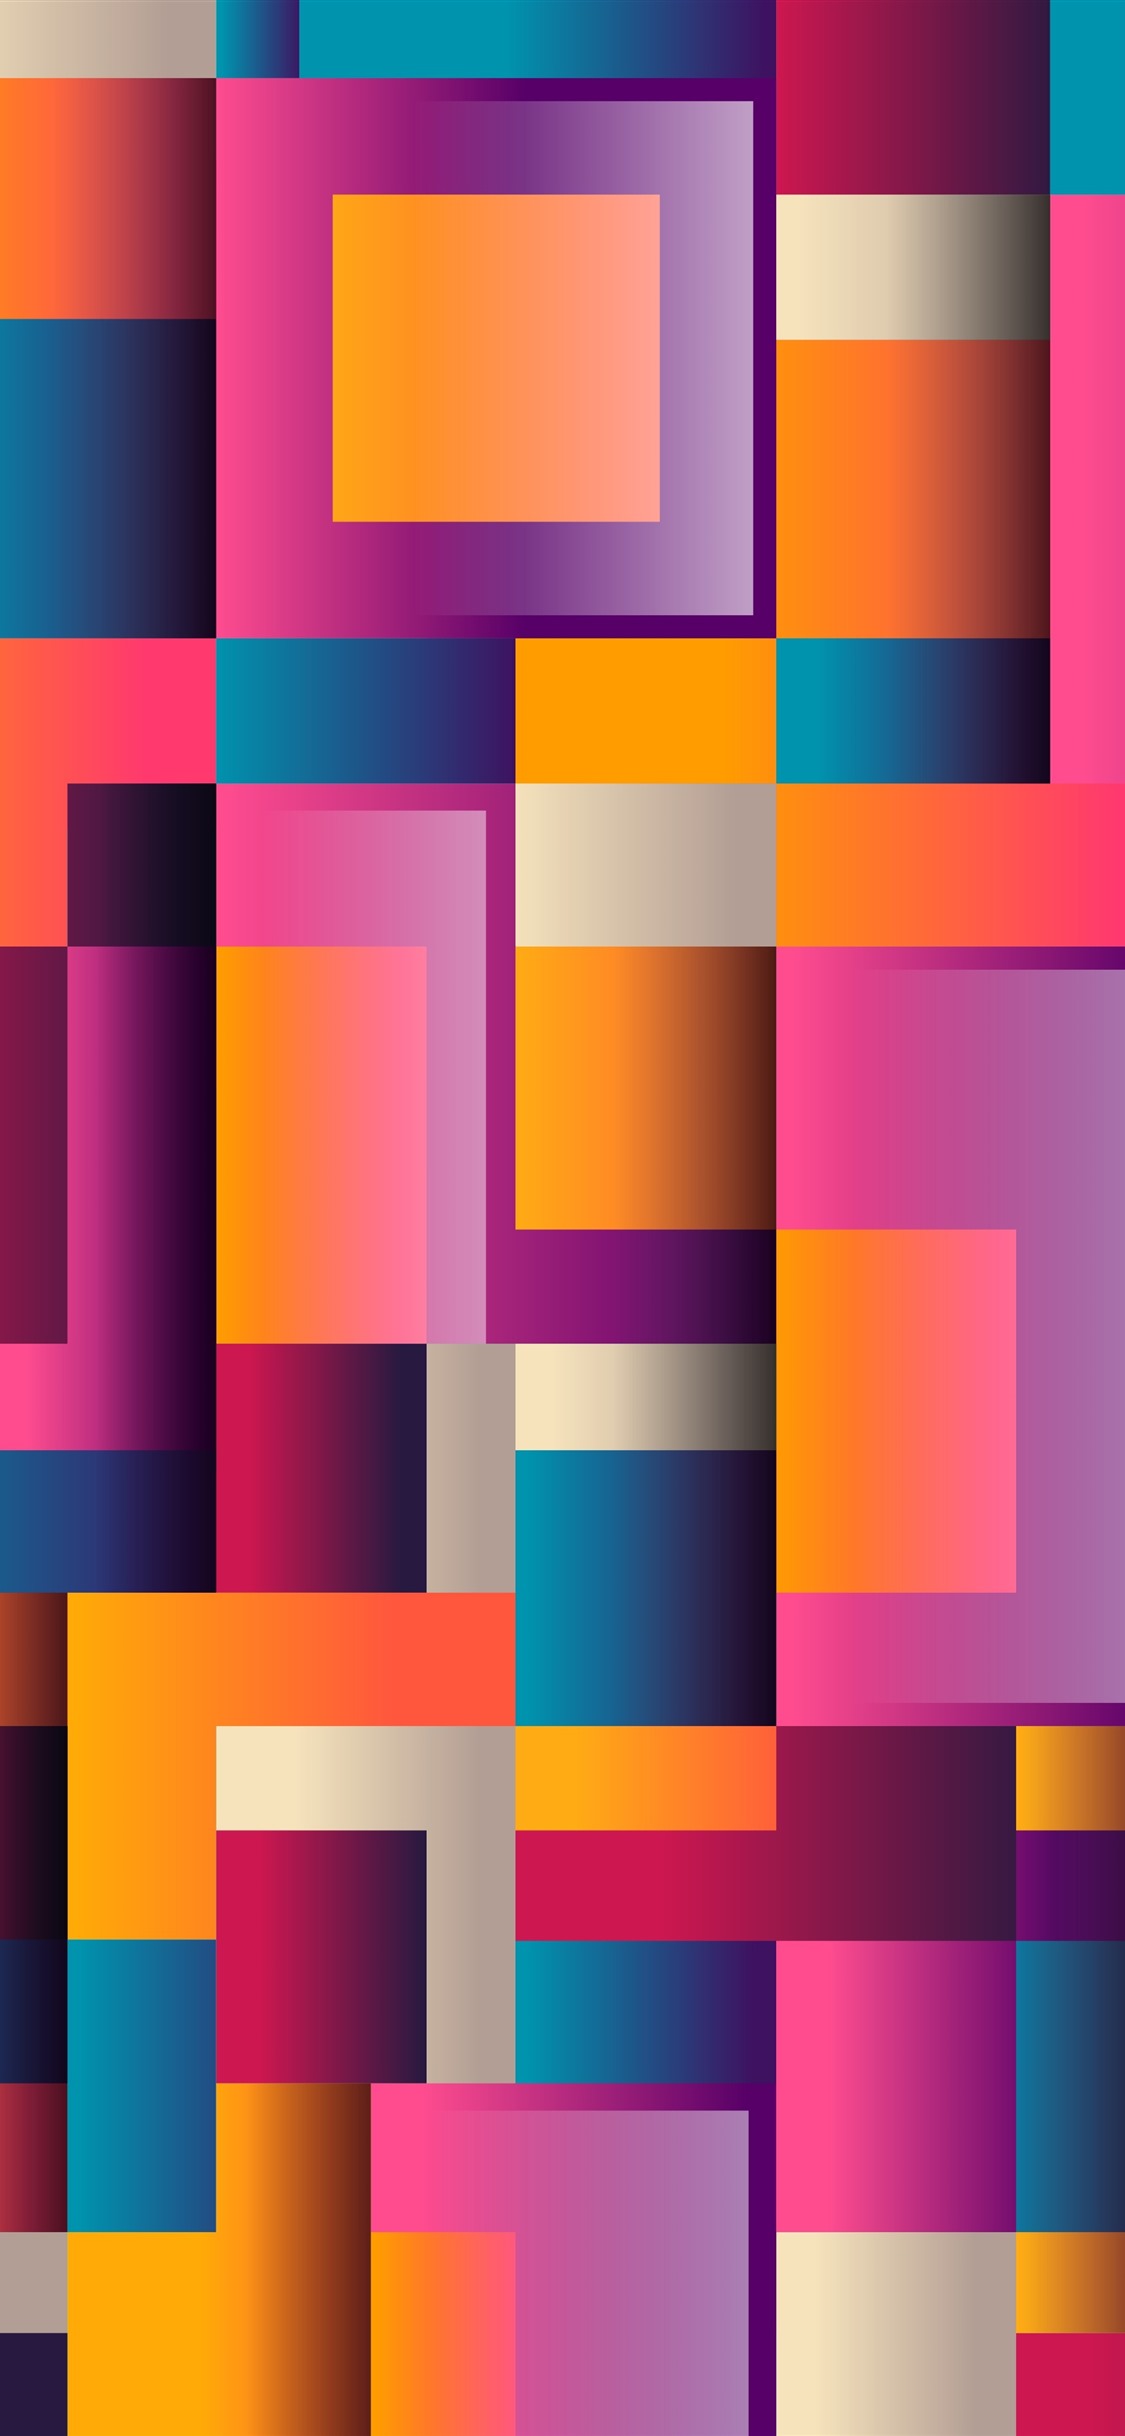 Wallpaper Colorful squares, geometric, abstract background 5120x2880 UHD 5K Picture, Image